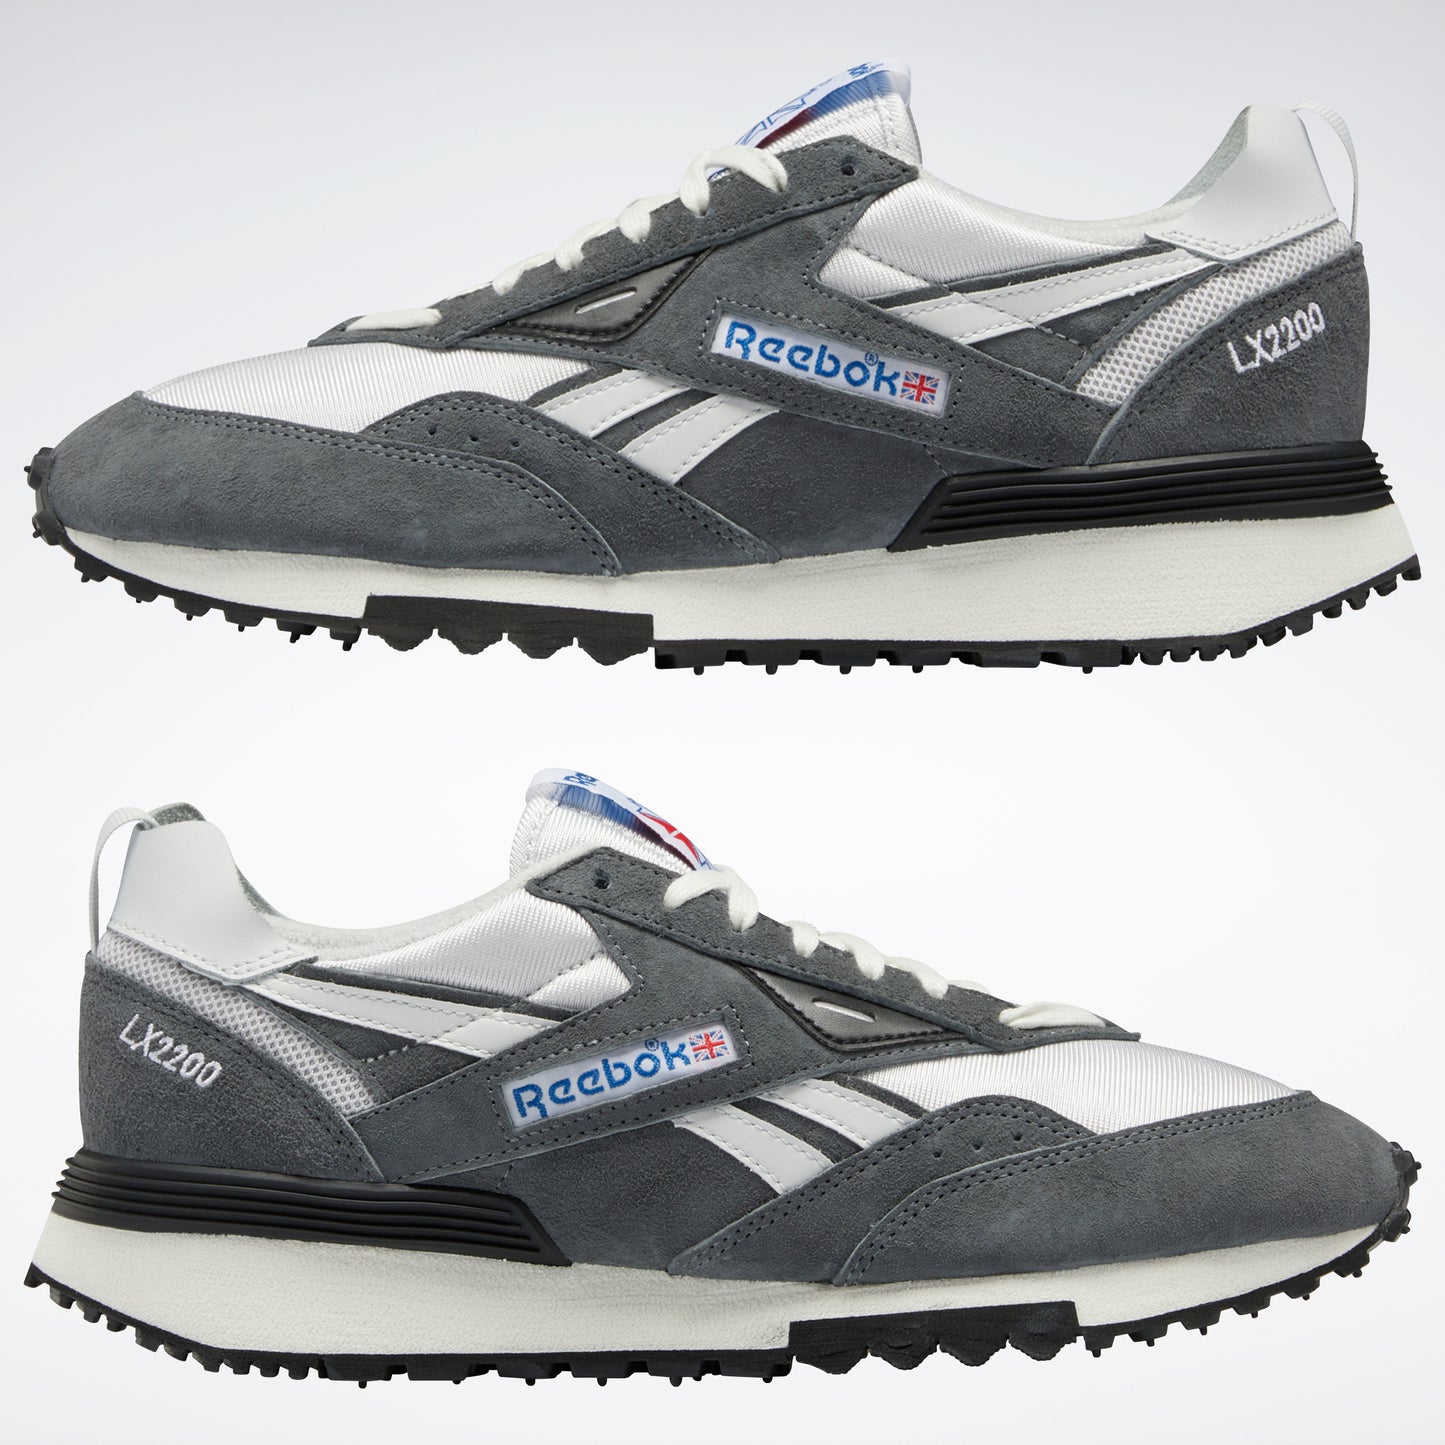 Chaussures Reebok Hommes Lx2200 Chaussures Cdgry6/Clgry1/Cblack